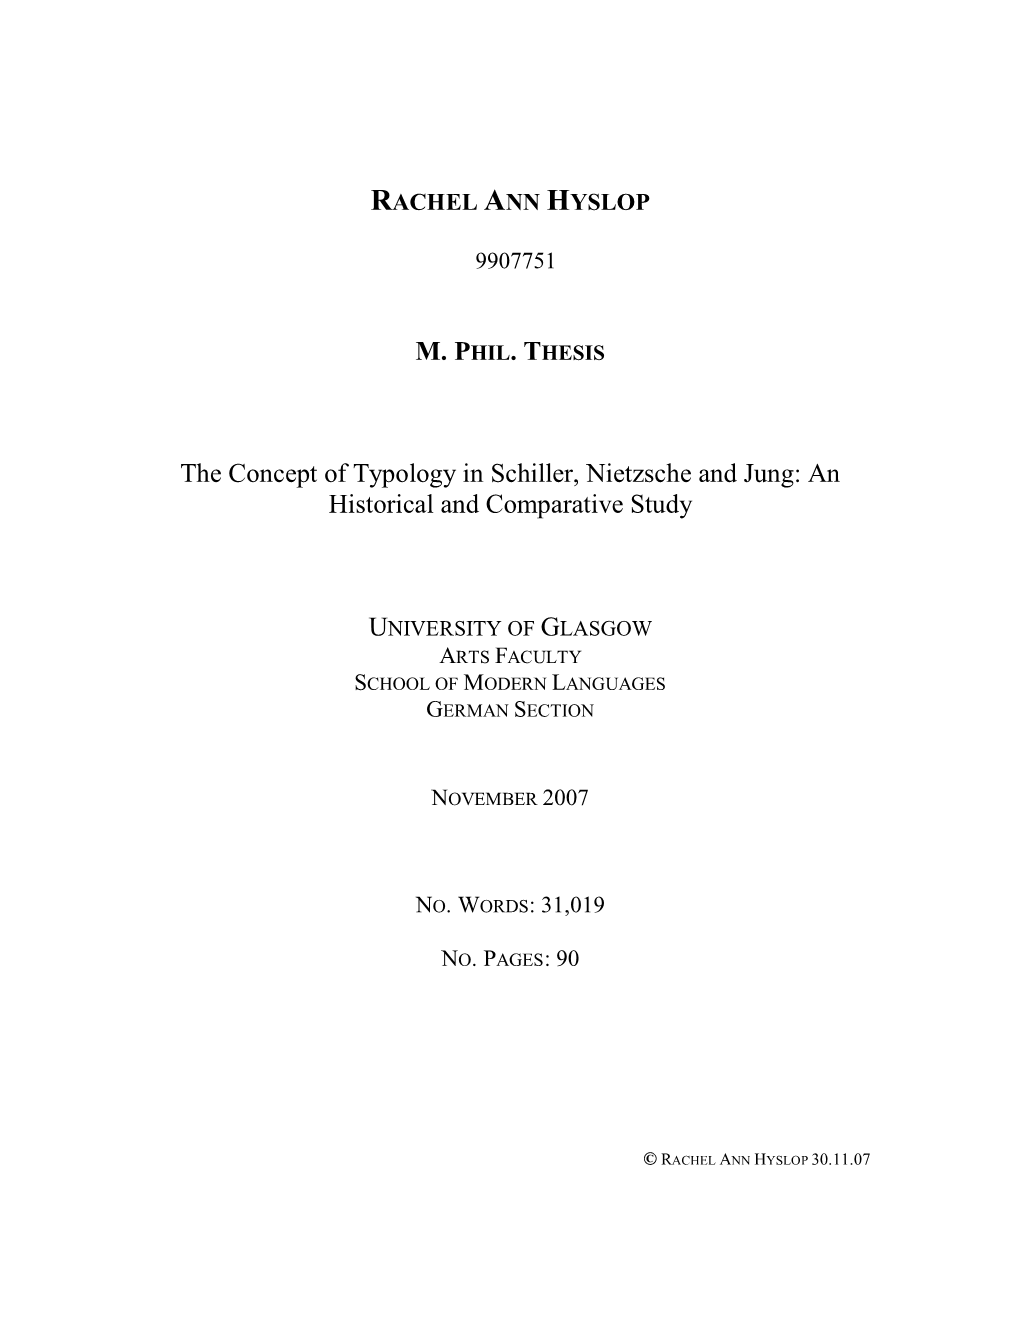 The Concept of Typology in Schiller, Nietzsche and Jung: an Historical and Comparative Study